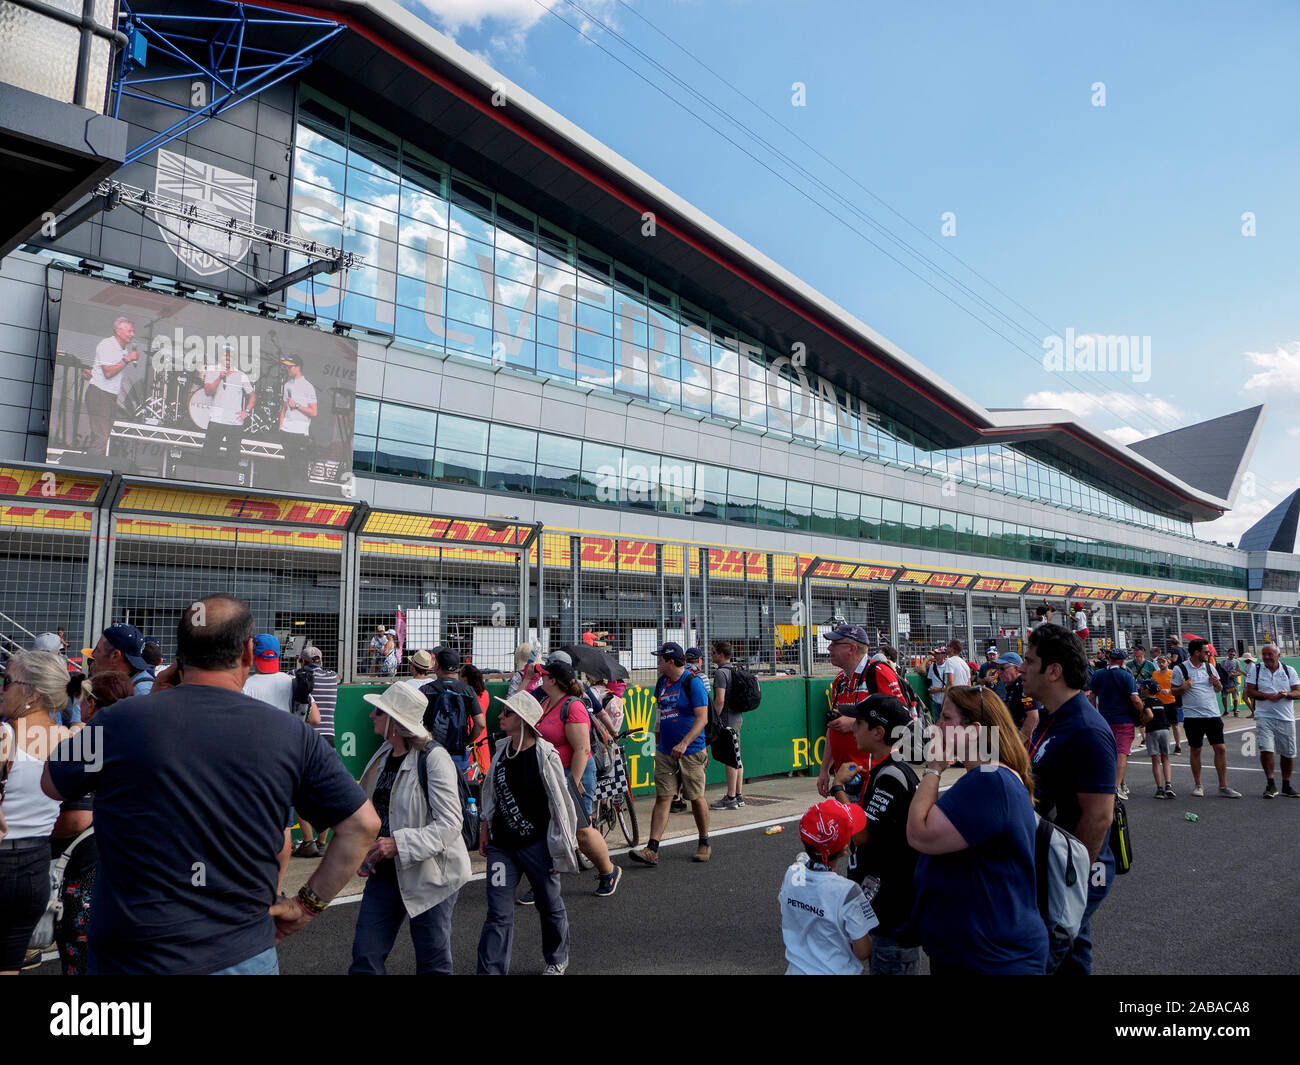 Silverstone race track/circuit wing building and pits. Stock Photo